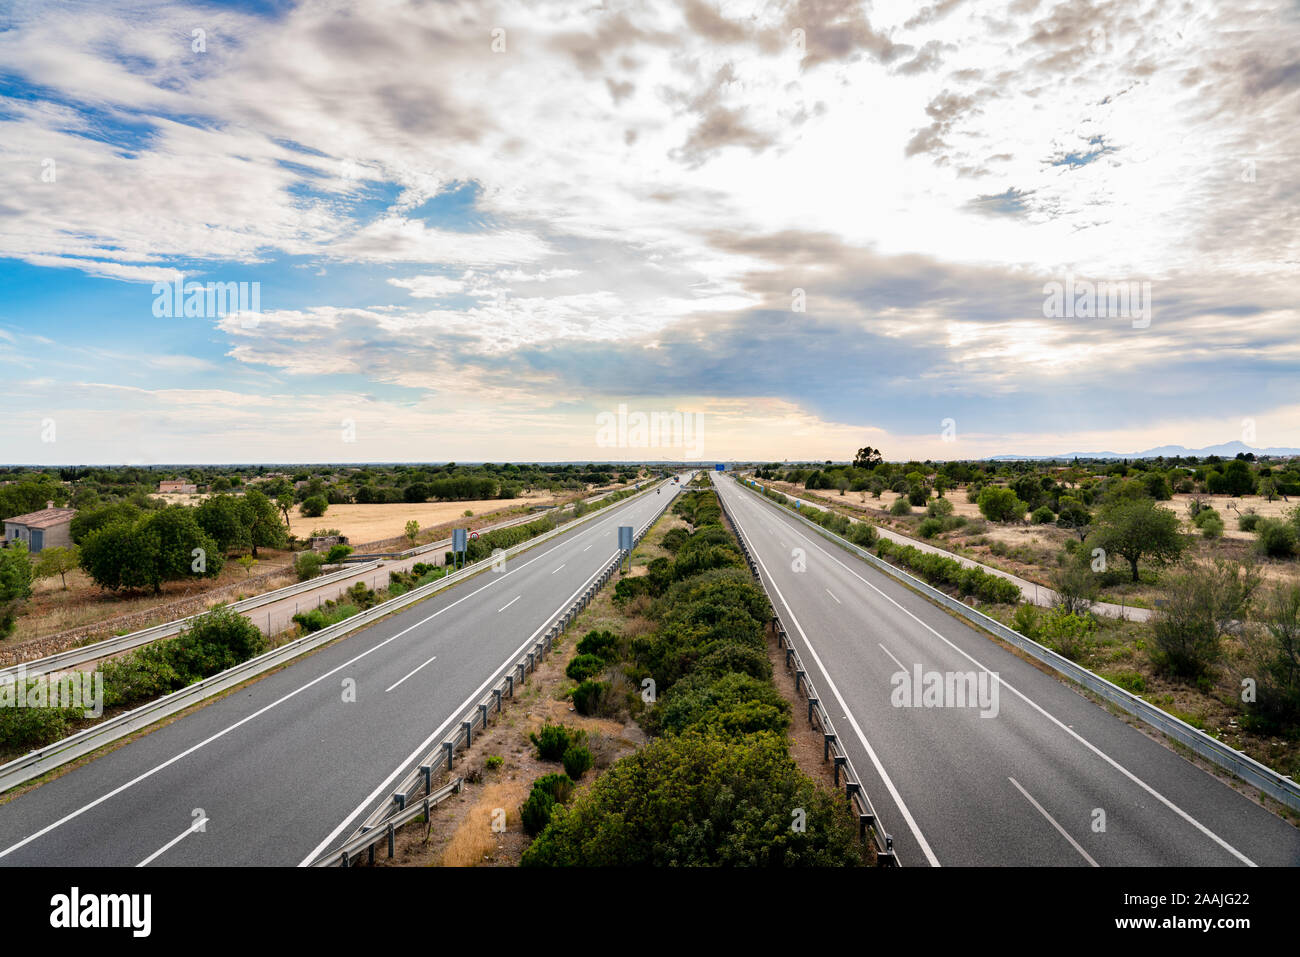 Spectacular views of a motorway in Mallorca called Autopista de Levante in Spanish, with an impressive sky and a well-defined horizon Stock Photo